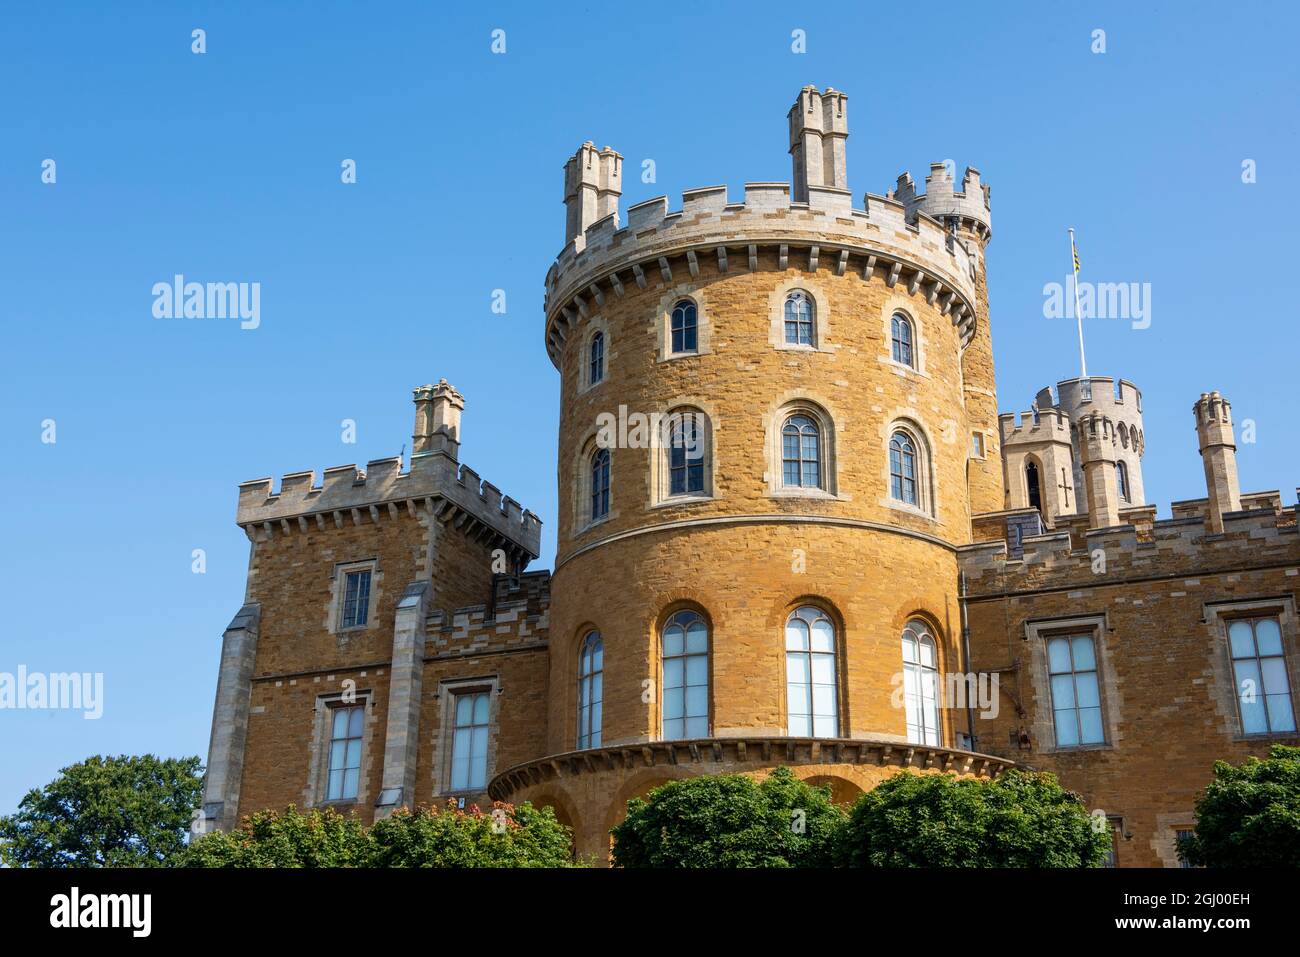 A sunny summer day at Belvoir Castle, Leicestershire England UK Stock Photo